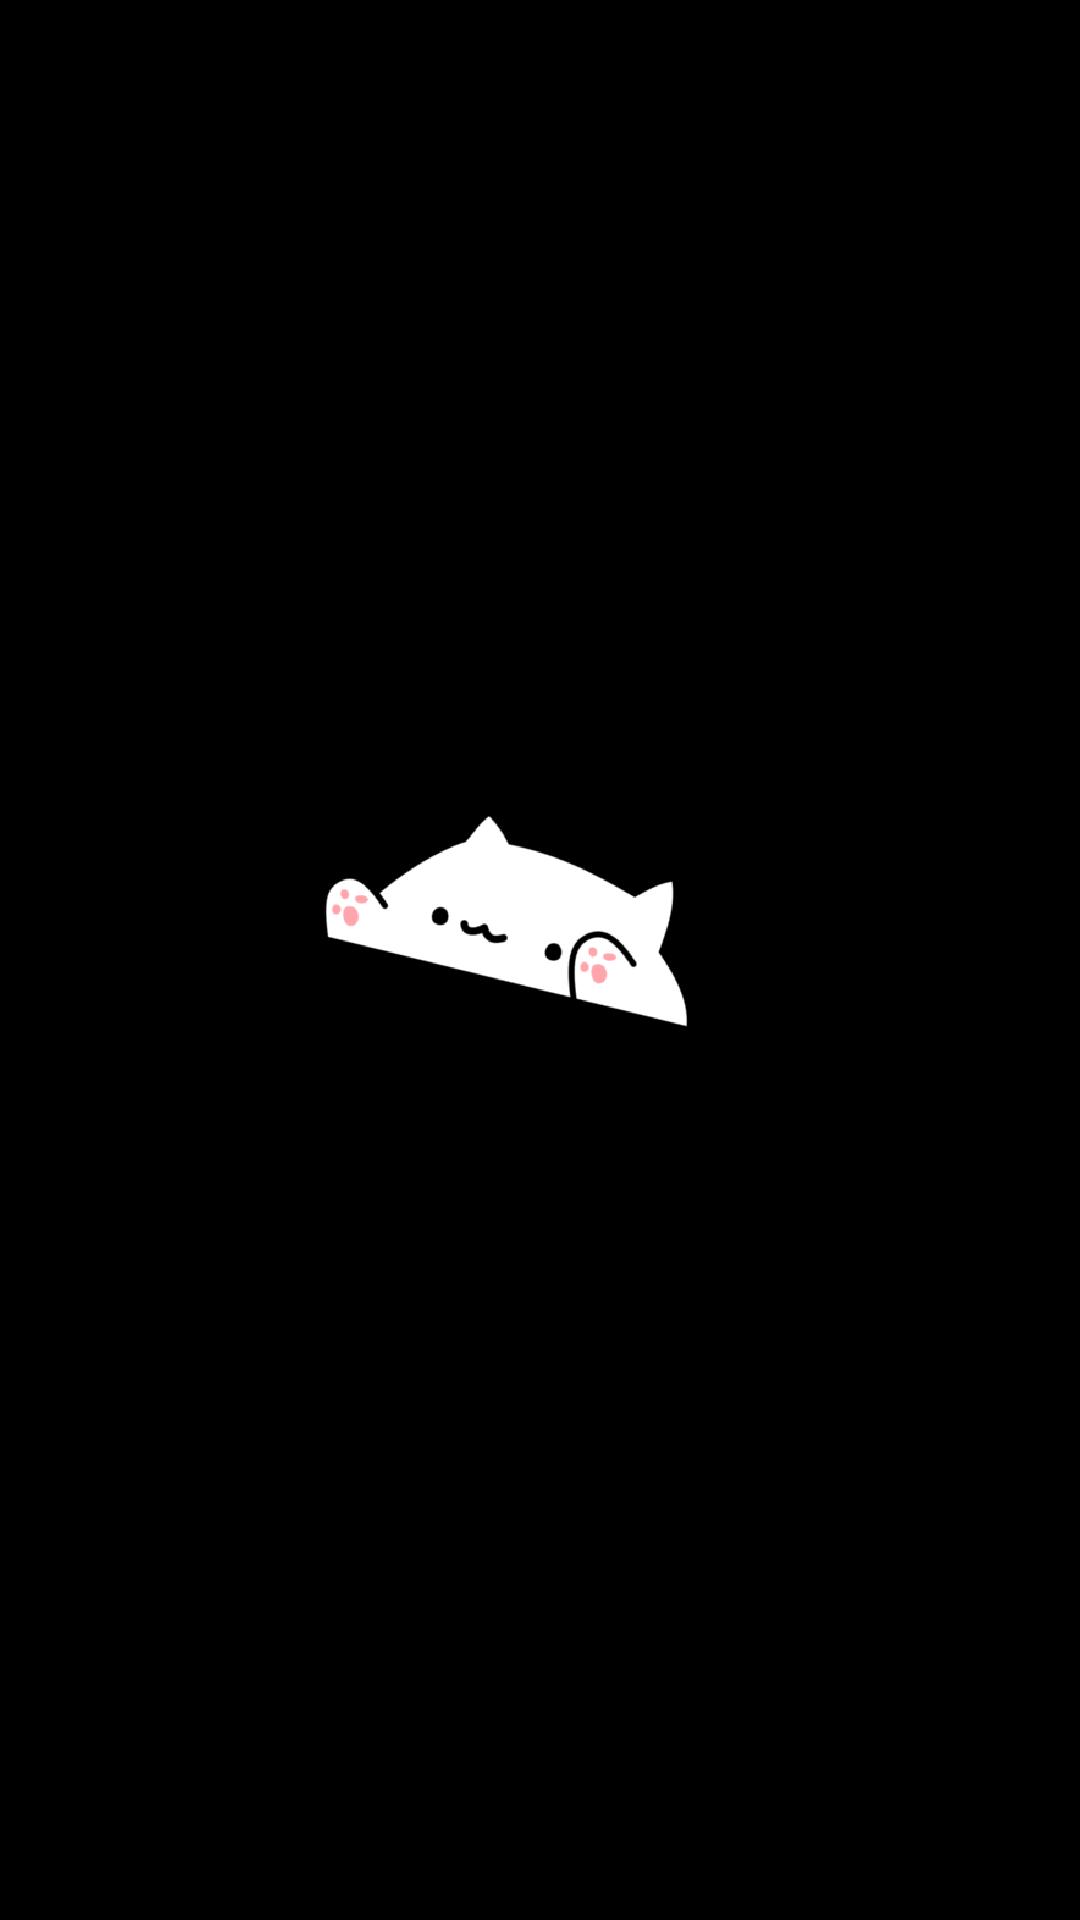 Bongo Cat Live Wallpaper for Android